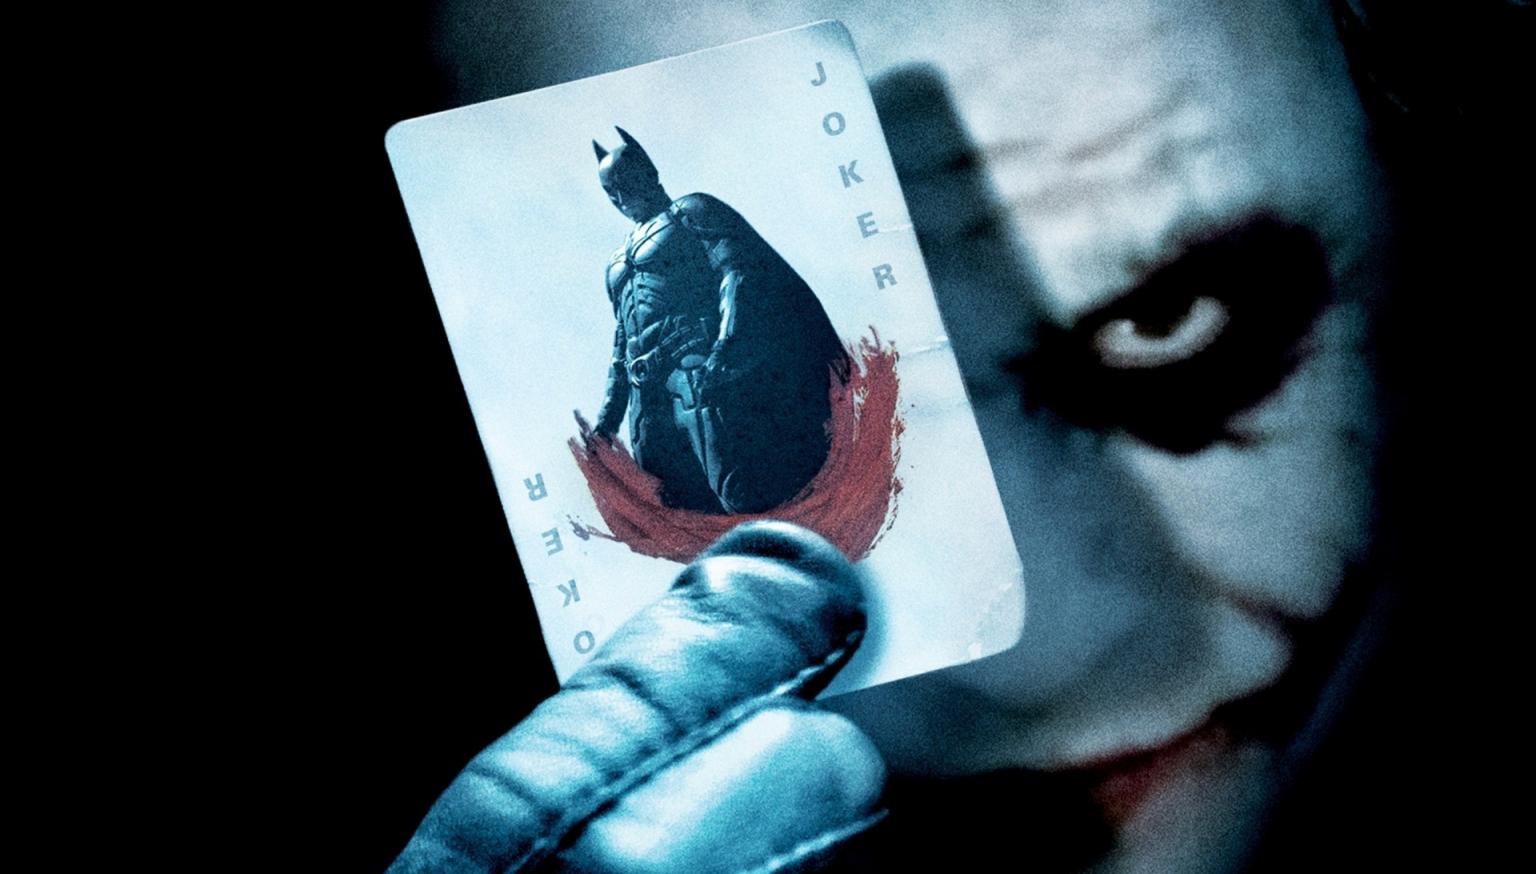 What's so fascinating about The Joker?